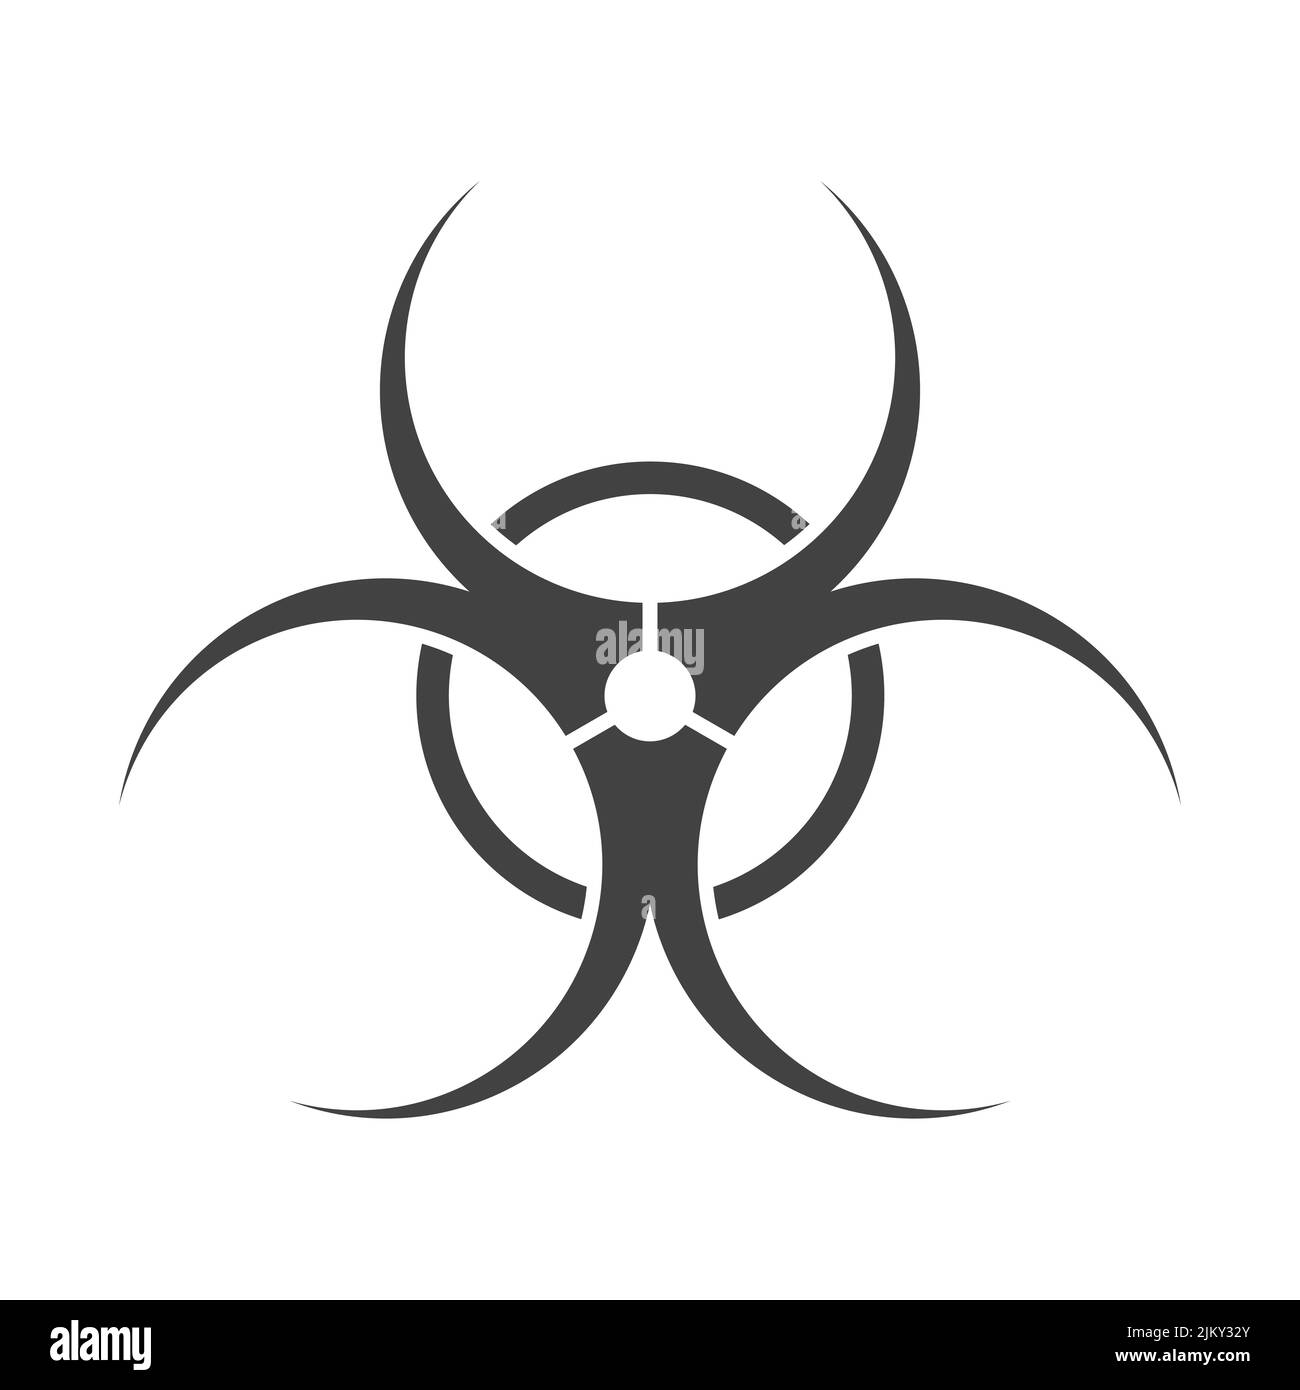 Biohazard icon. Biological hazard sign isolated on white background Stock Vector